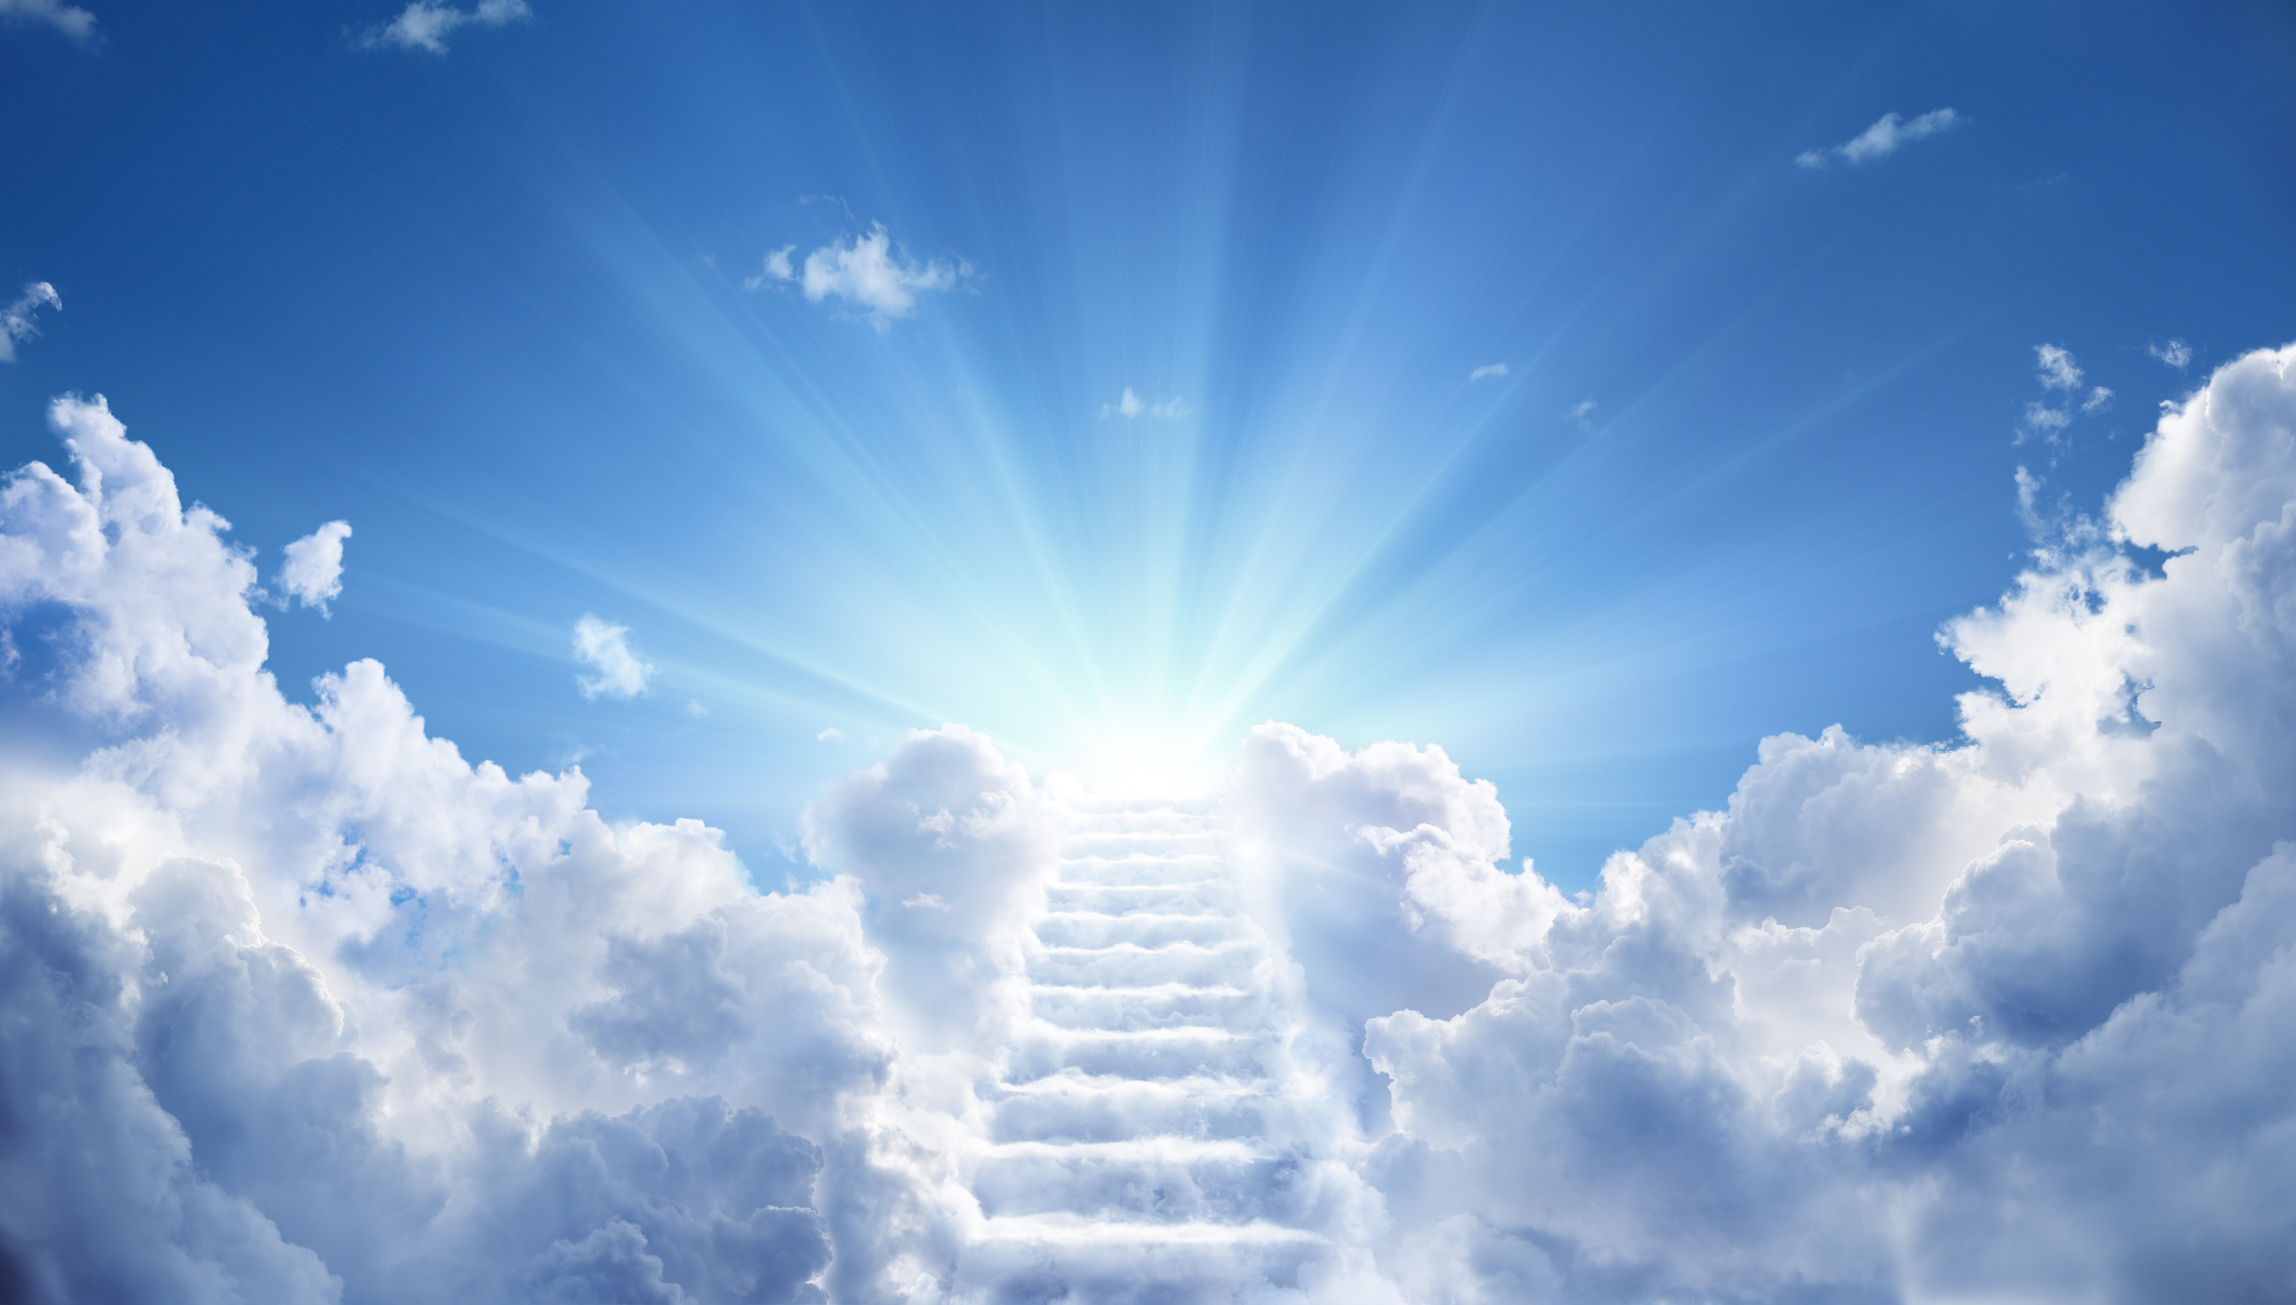 A staircase made of clouds ascends towards a bright light in a blue sky, with rays of light shining through the clouds